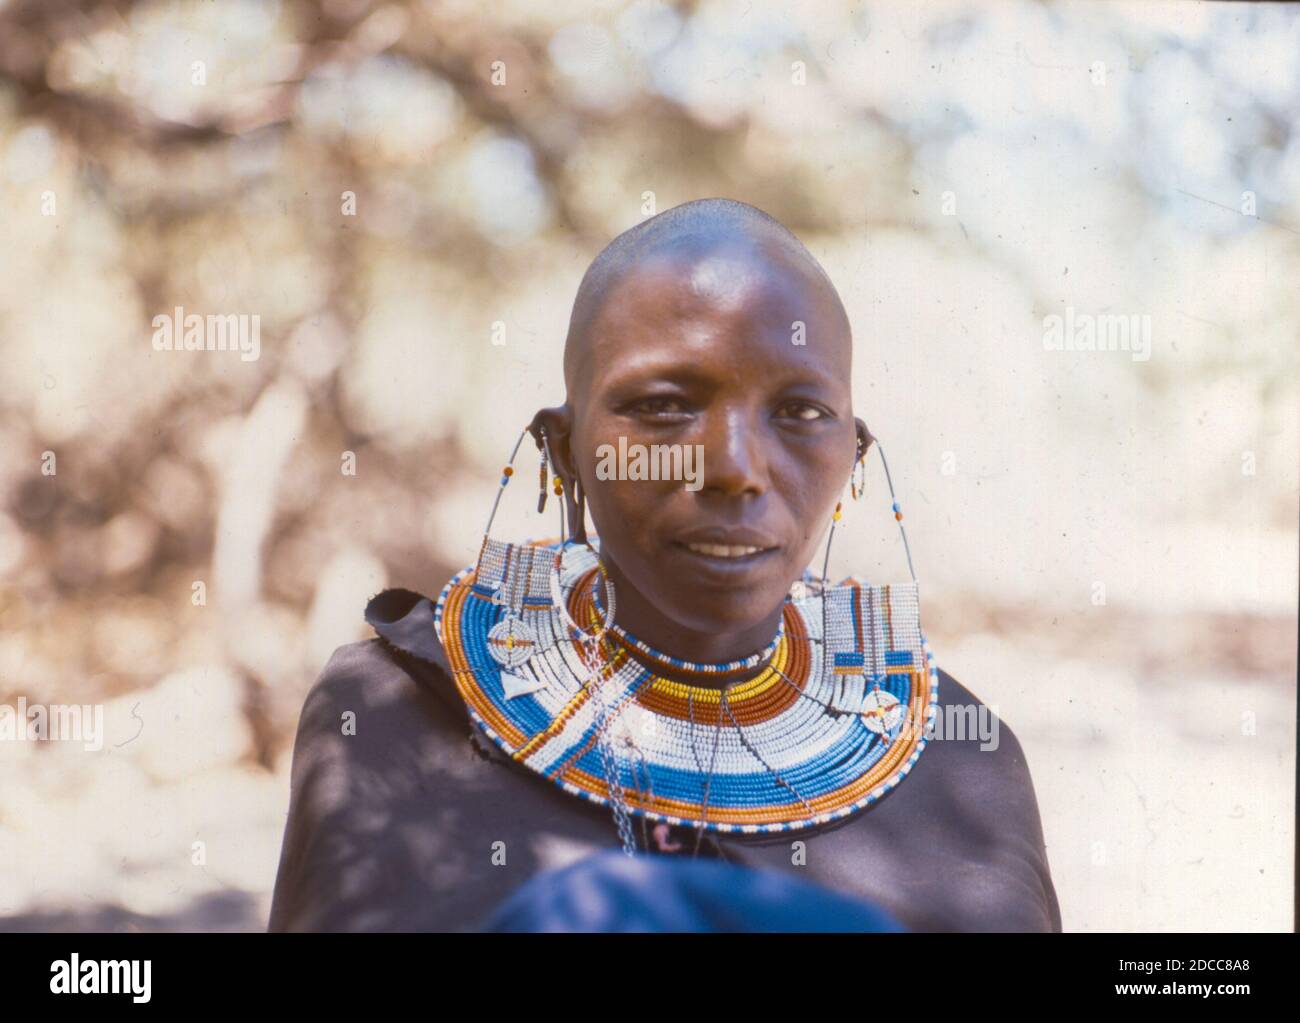 A smiling portrait of a Maasai woman in East Africa taken in the 1960s Stock Photo